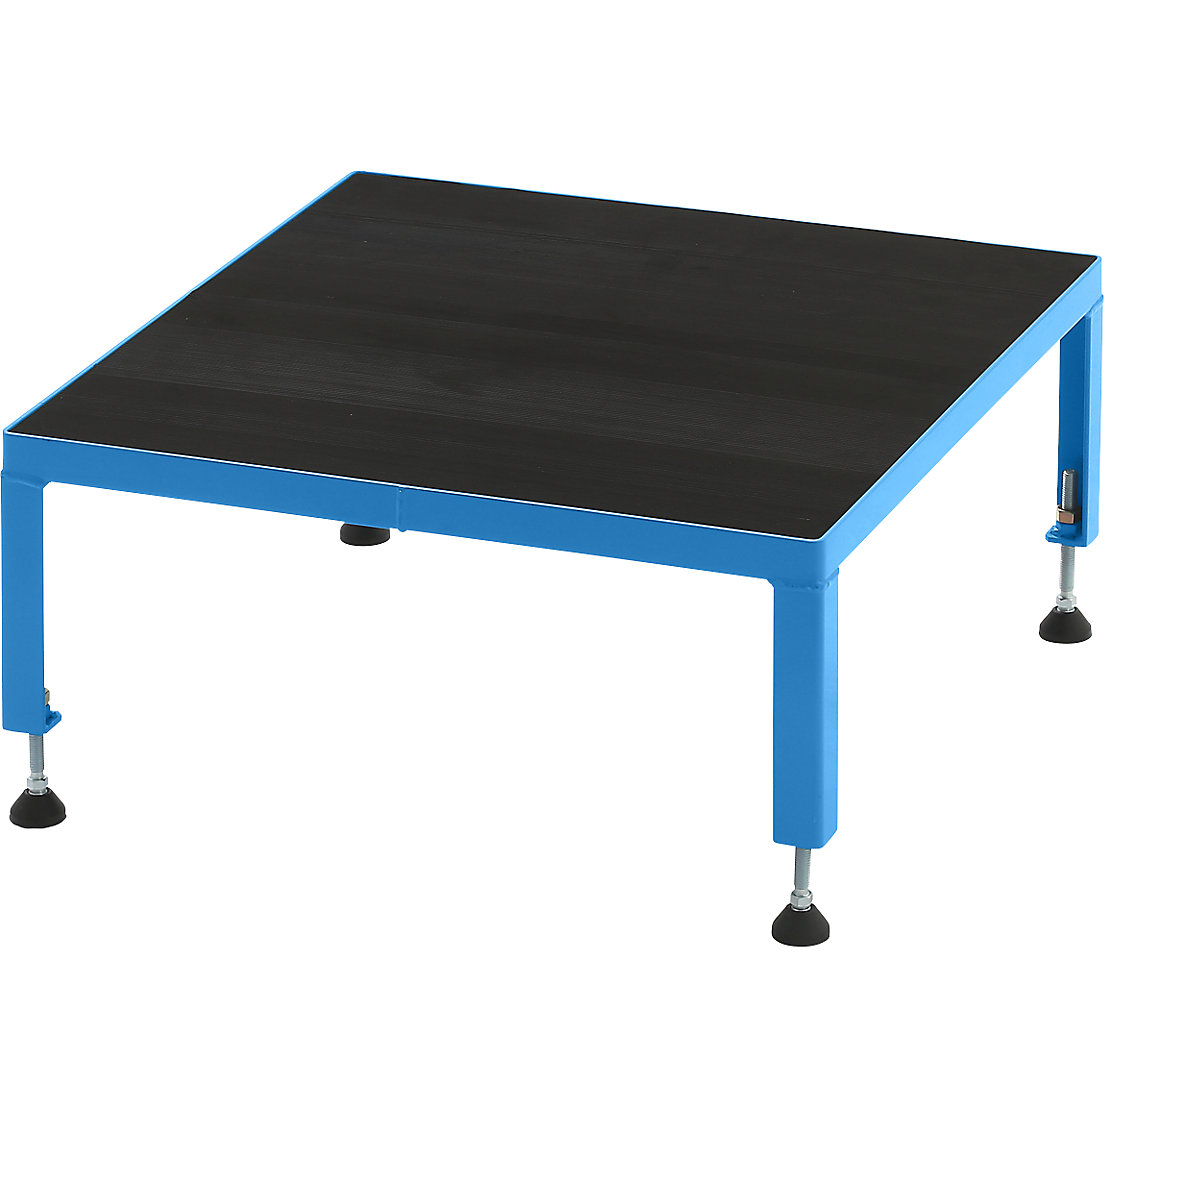 Working platform, height adjustable from 255 – 320 mm – eurokraft pro, with ribbed rubber plate, platform LxW 610 x 610 mm, light blue-10